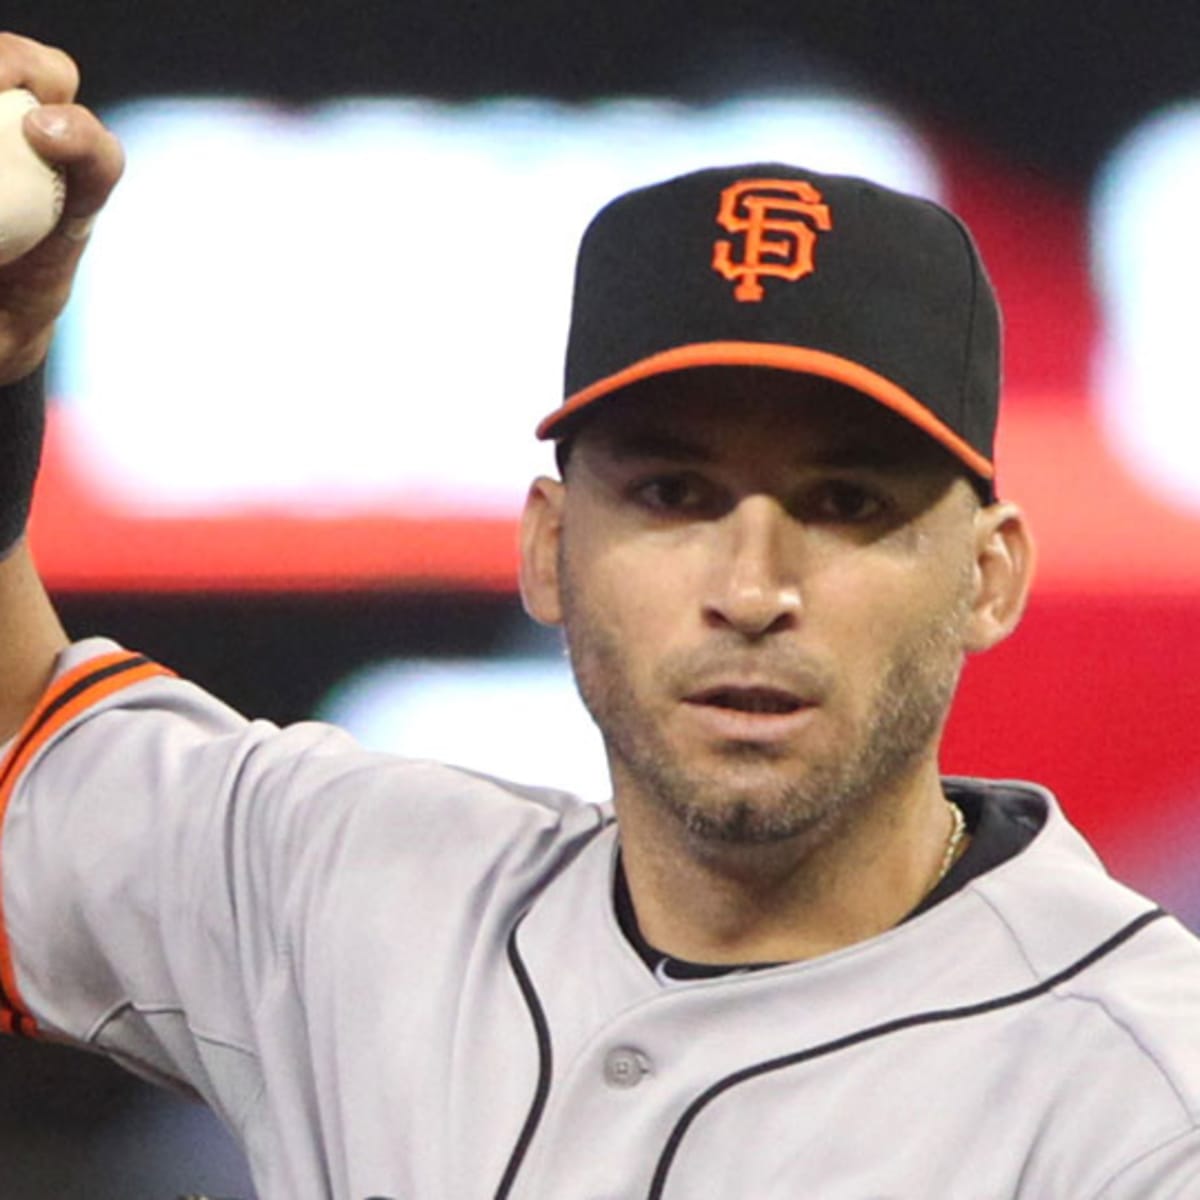 San Francisco Giants infielder Marco Scutaro undergoes back surgery -  Sports Illustrated